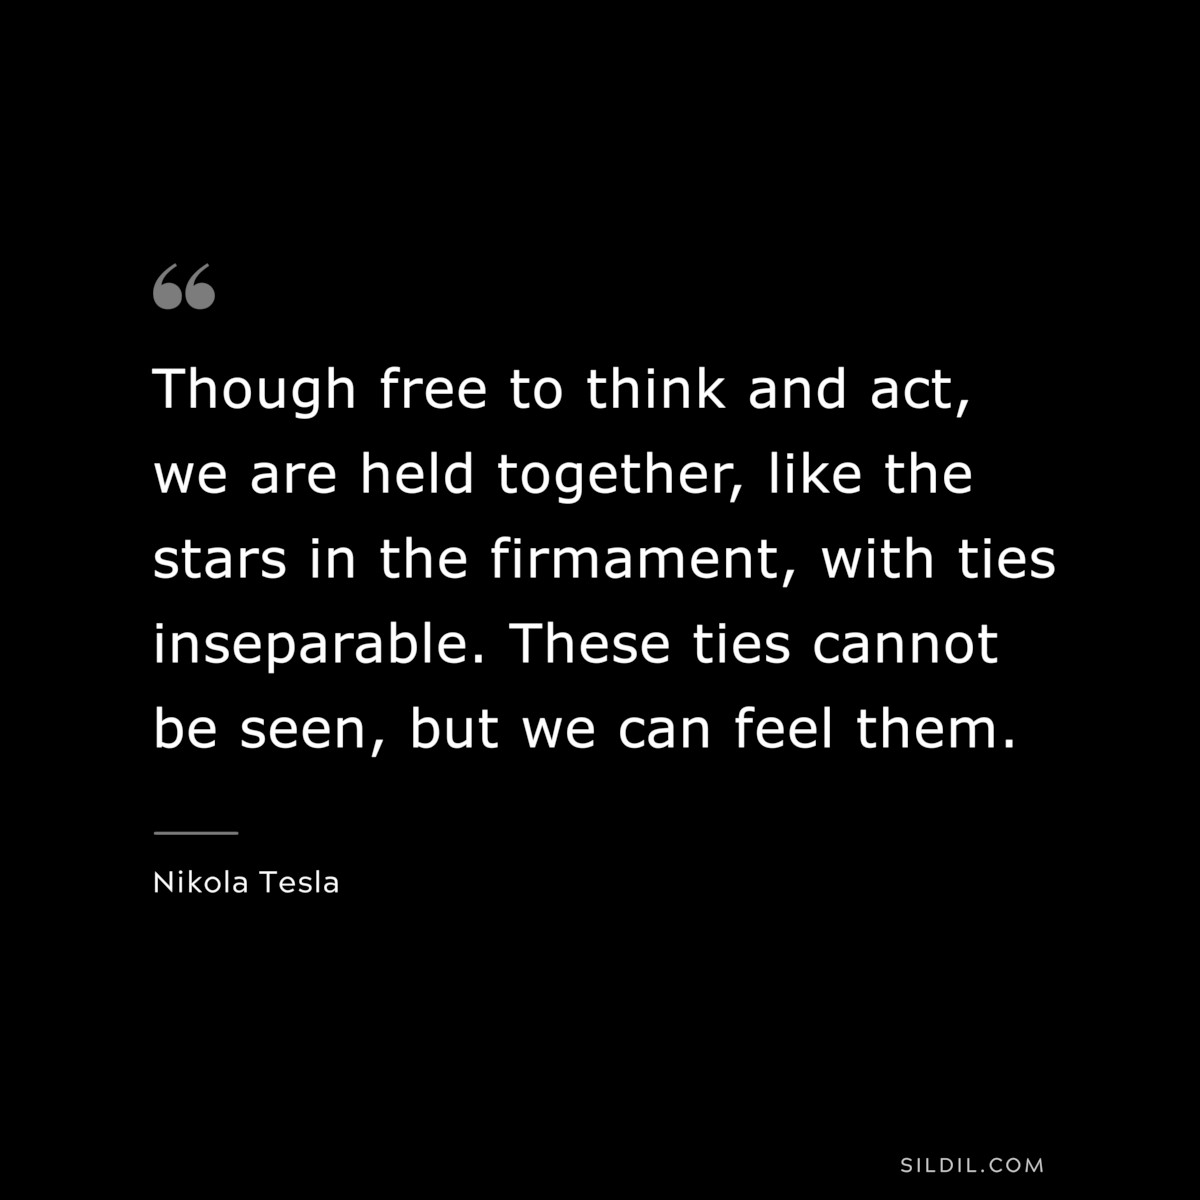 Though free to think and act, we are held together, like the stars in the firmament, with ties inseparable. These ties cannot be seen, but we can feel them. ― Nikola Tesla